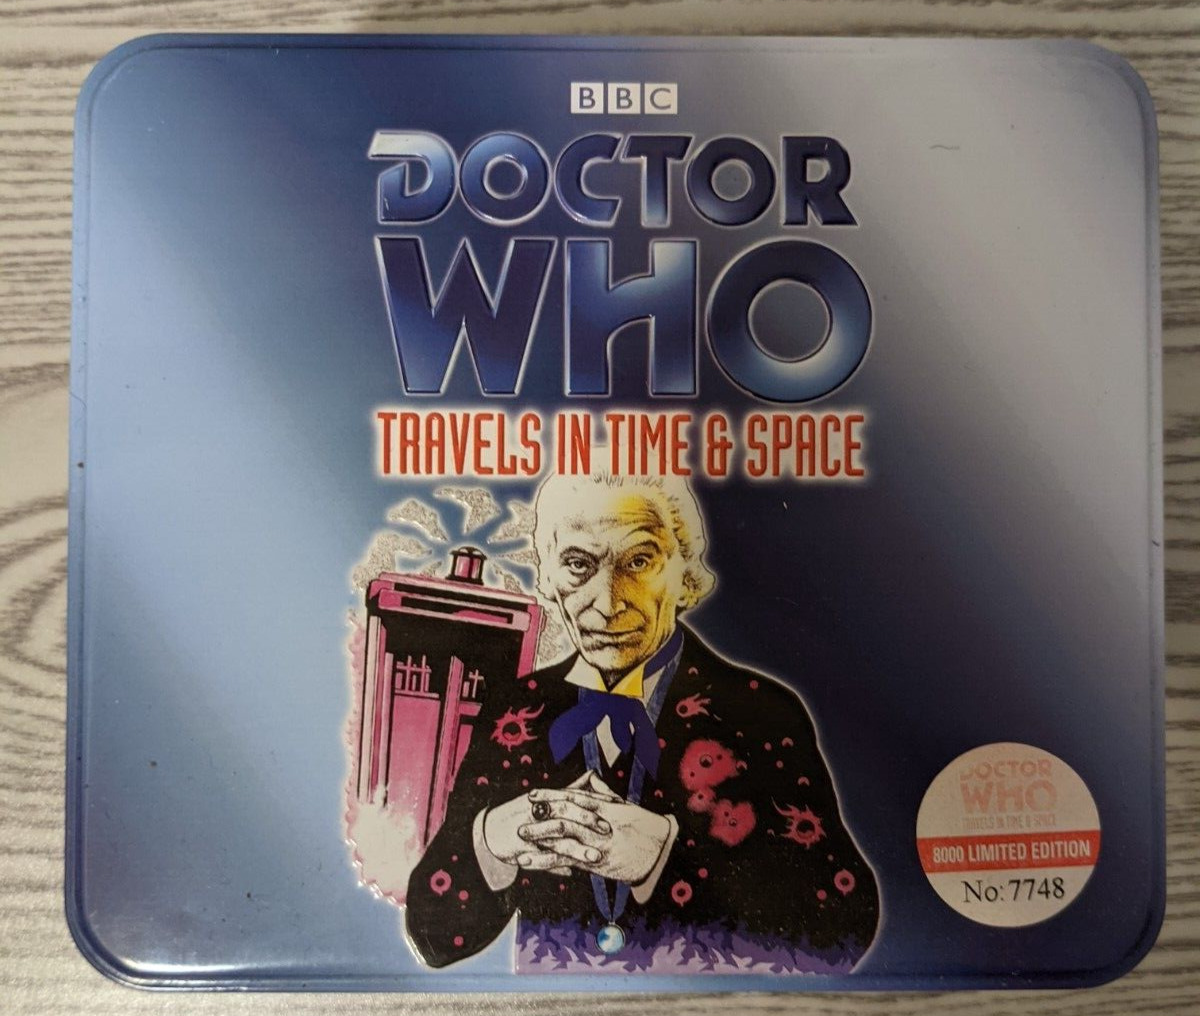 Doctor Who-Travels in Time & Space - 15 CD\'s Audio Book in Presentation Tin